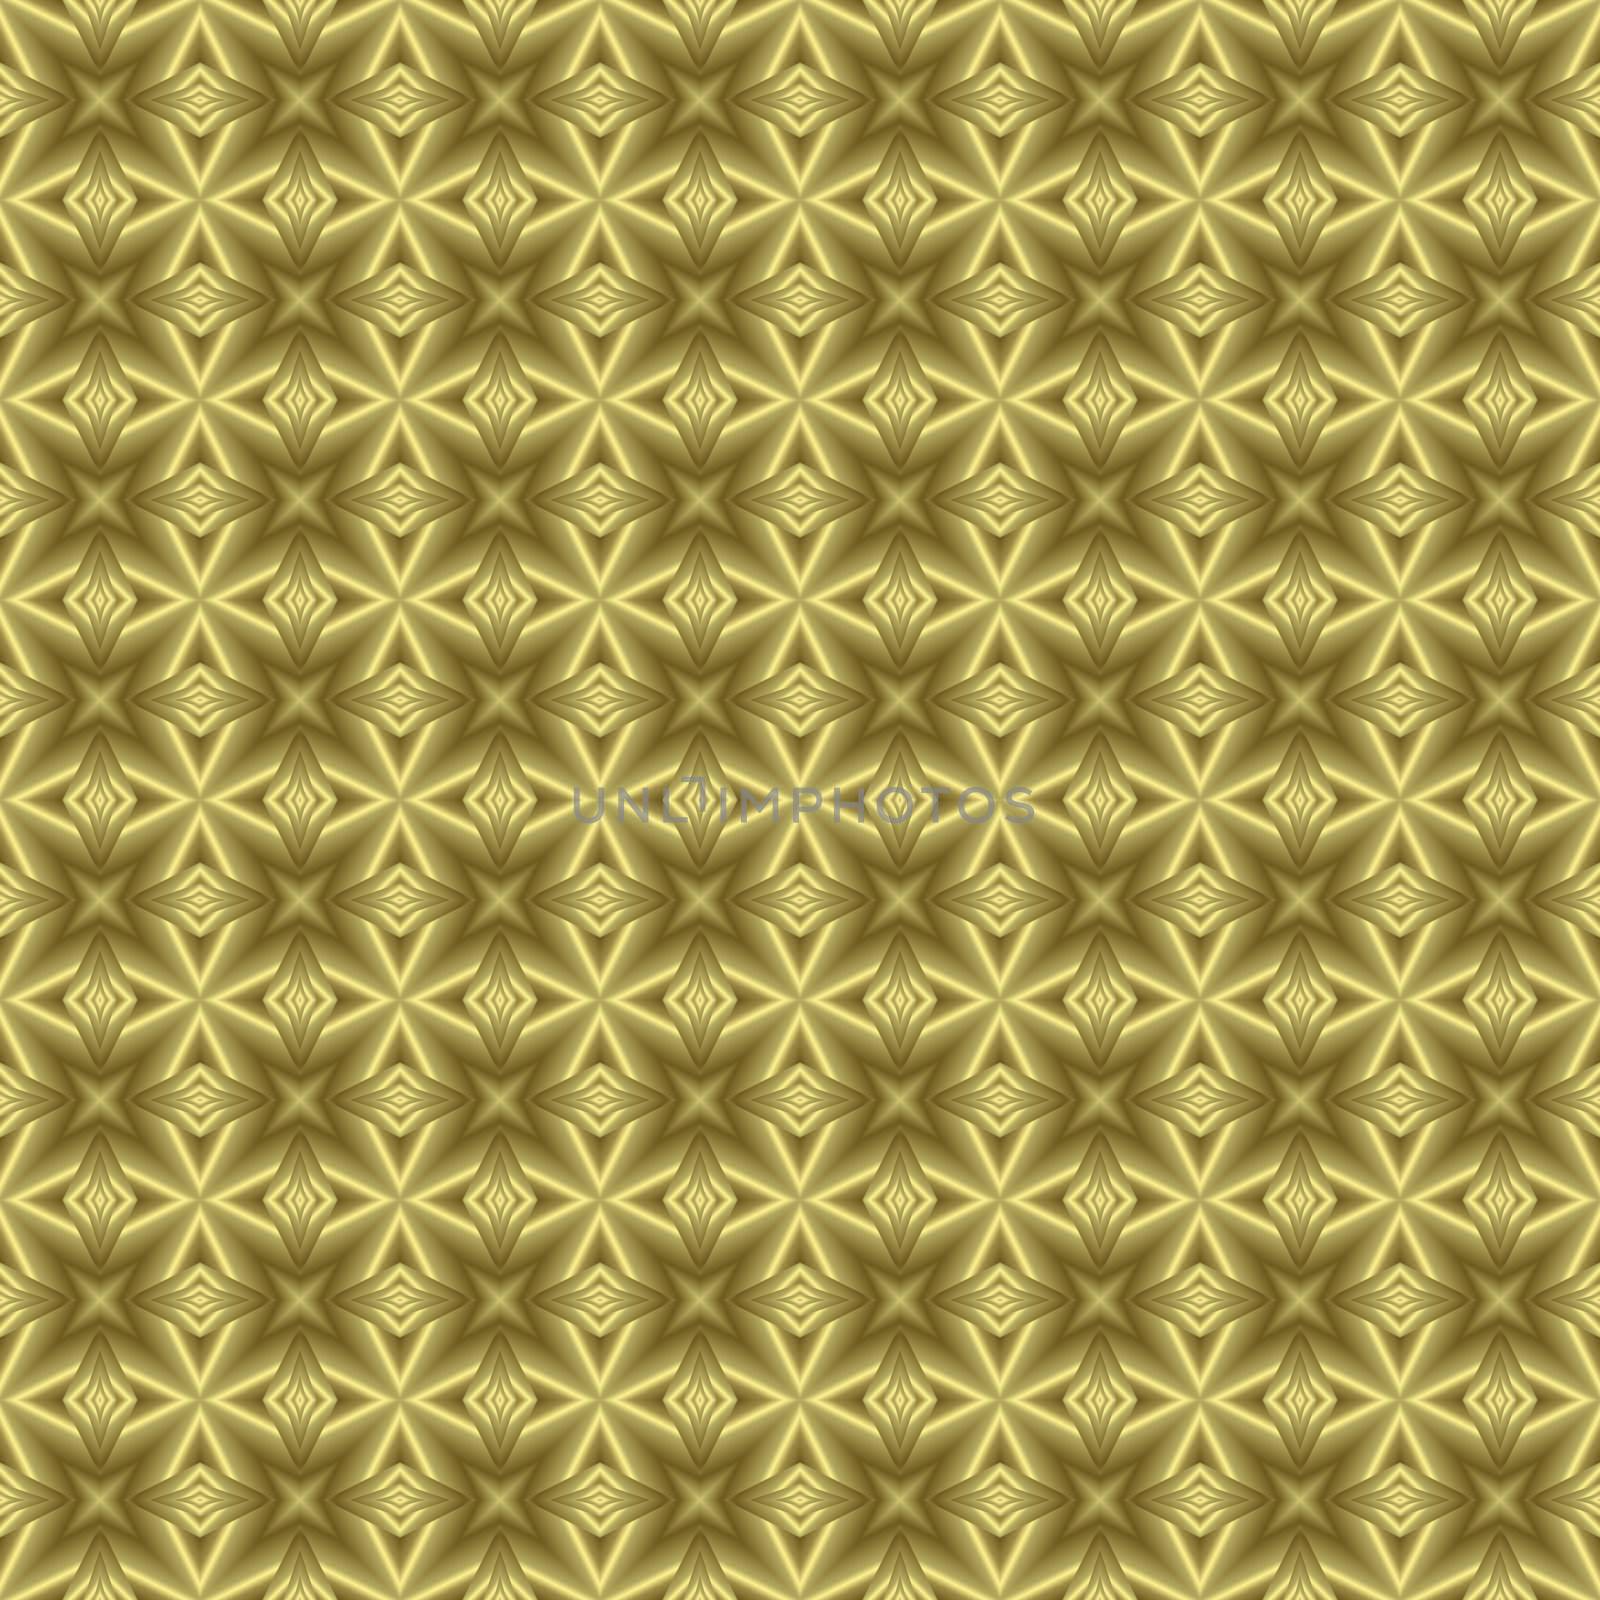 seamless tilable background texture with a floral or "fleur de lis" look